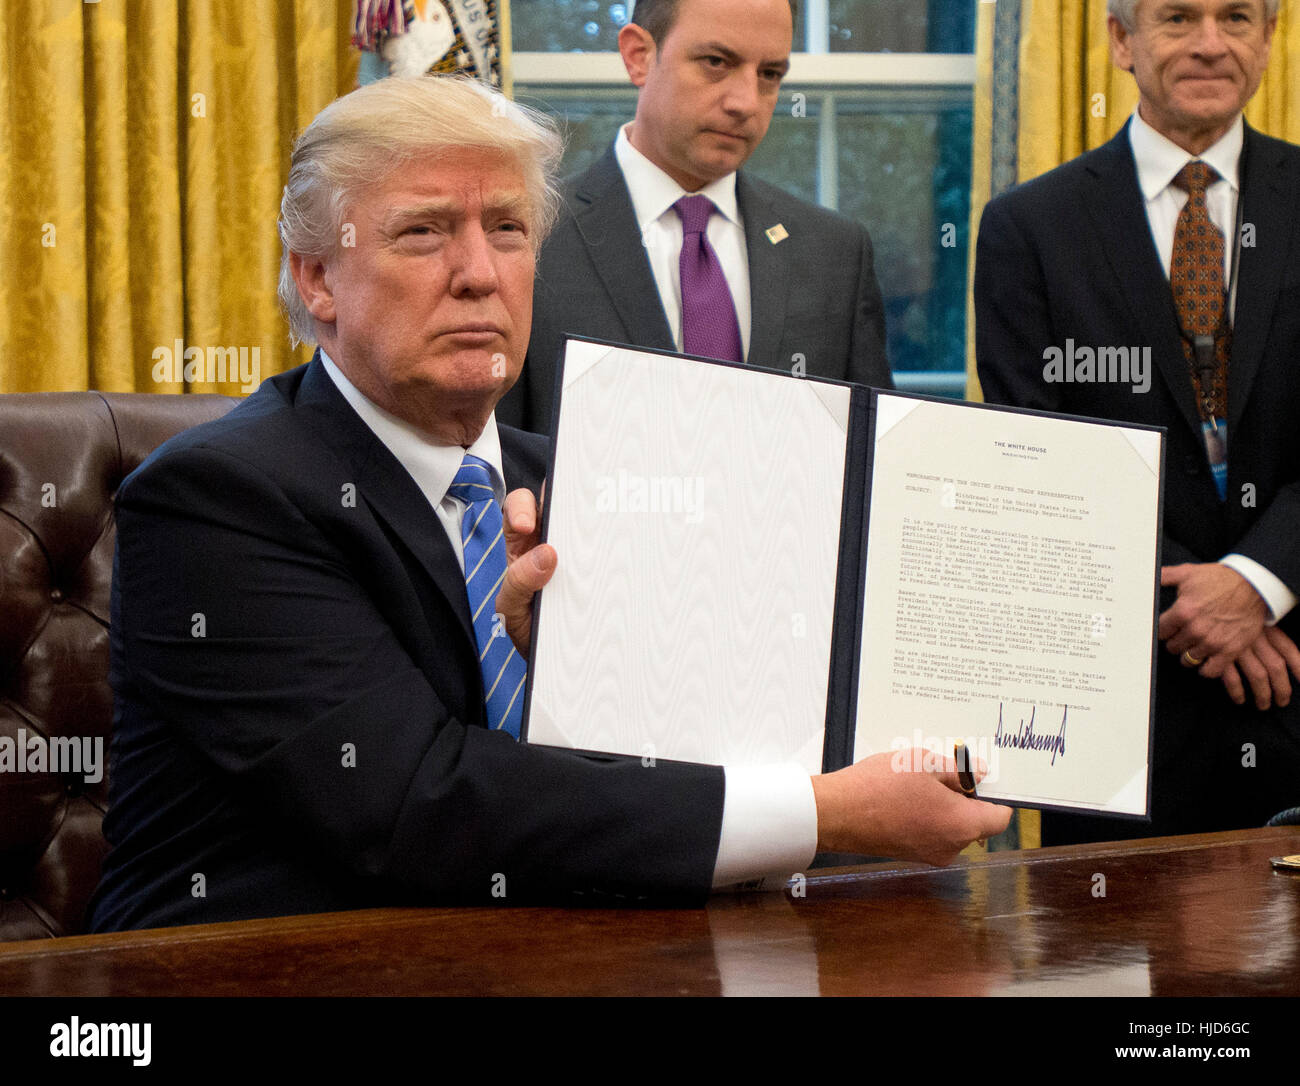 Abortions Overseas. 23rd Jan, 2017. United States President Donald Trump shows the Executive Order withdrawing the US from the Trans-Pacific Partnership (TPP) after signing it in the Oval Office of the White House in Washington, DC on Monday, January 23, 2017. The other two Executive Orders concerned a US Government hiring freeze for all departments but the military, and "Mexico City" which bans federal funding of abortions overseas. Credit: Ron Sachs/Pool via CNP - NO WIRE SERVICE- Photo: Ron Sachs/Consolidated News Photos/Ron Sachs - Pool via CNP/dpa/Alamy Live News Stock Photo